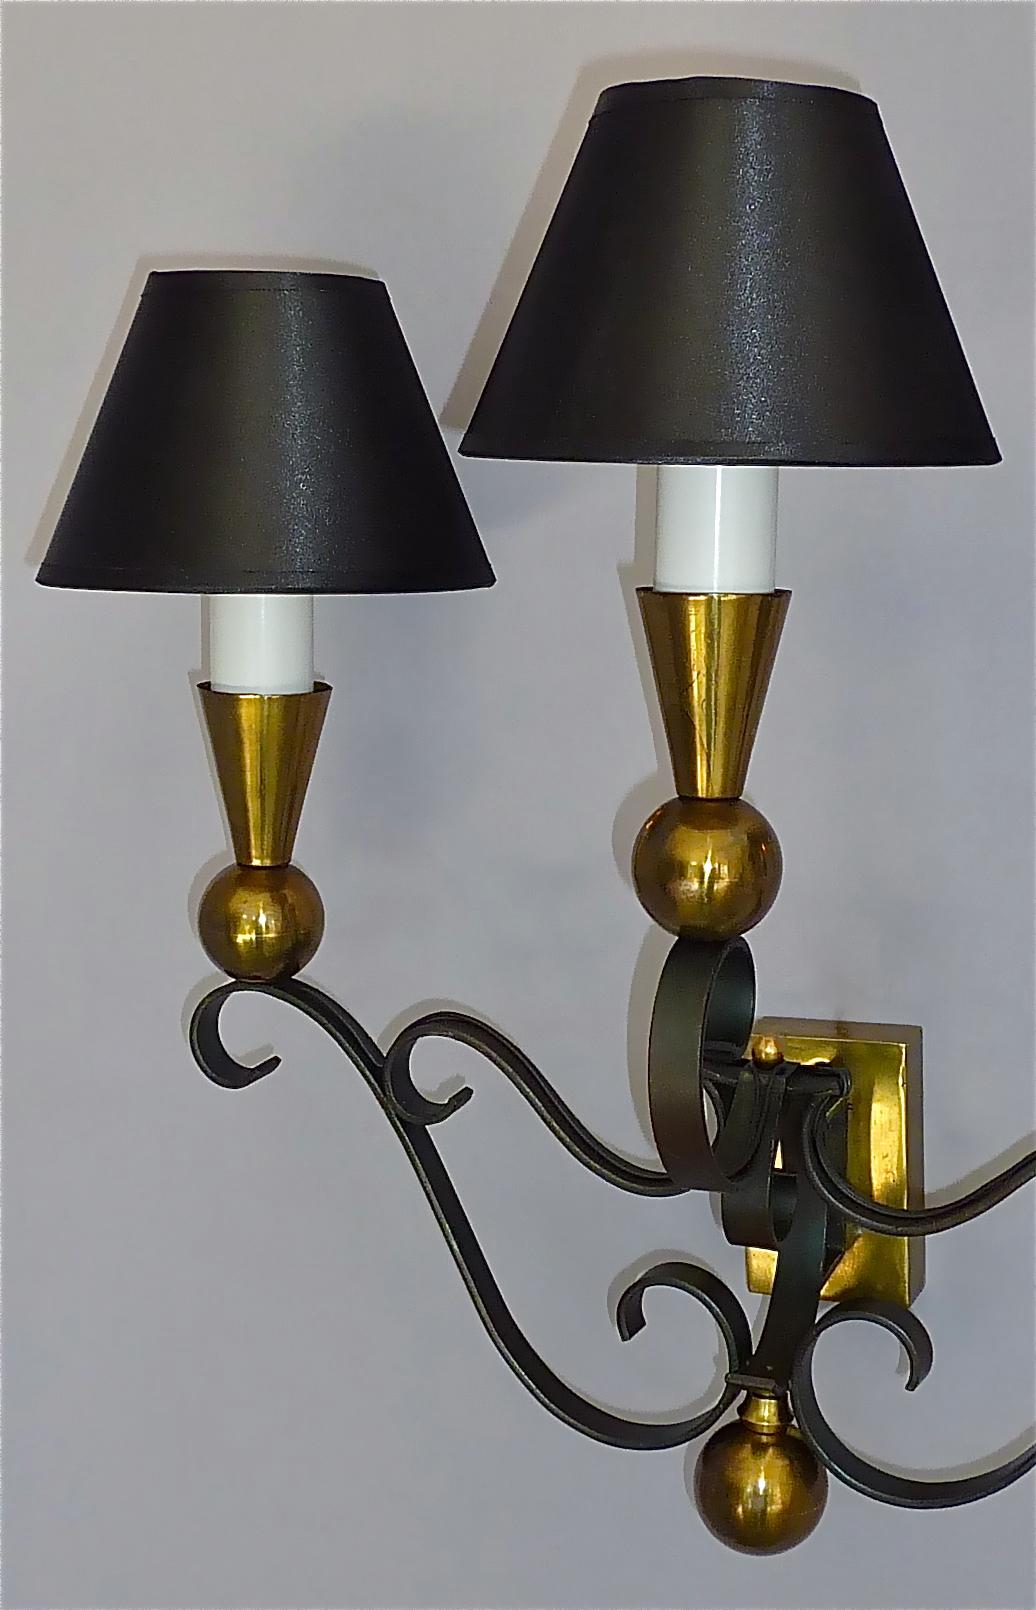 3 Rare Sconces Poillerat Adnet Style Black Forged Iron Brass Gold France 1950s For Sale 2